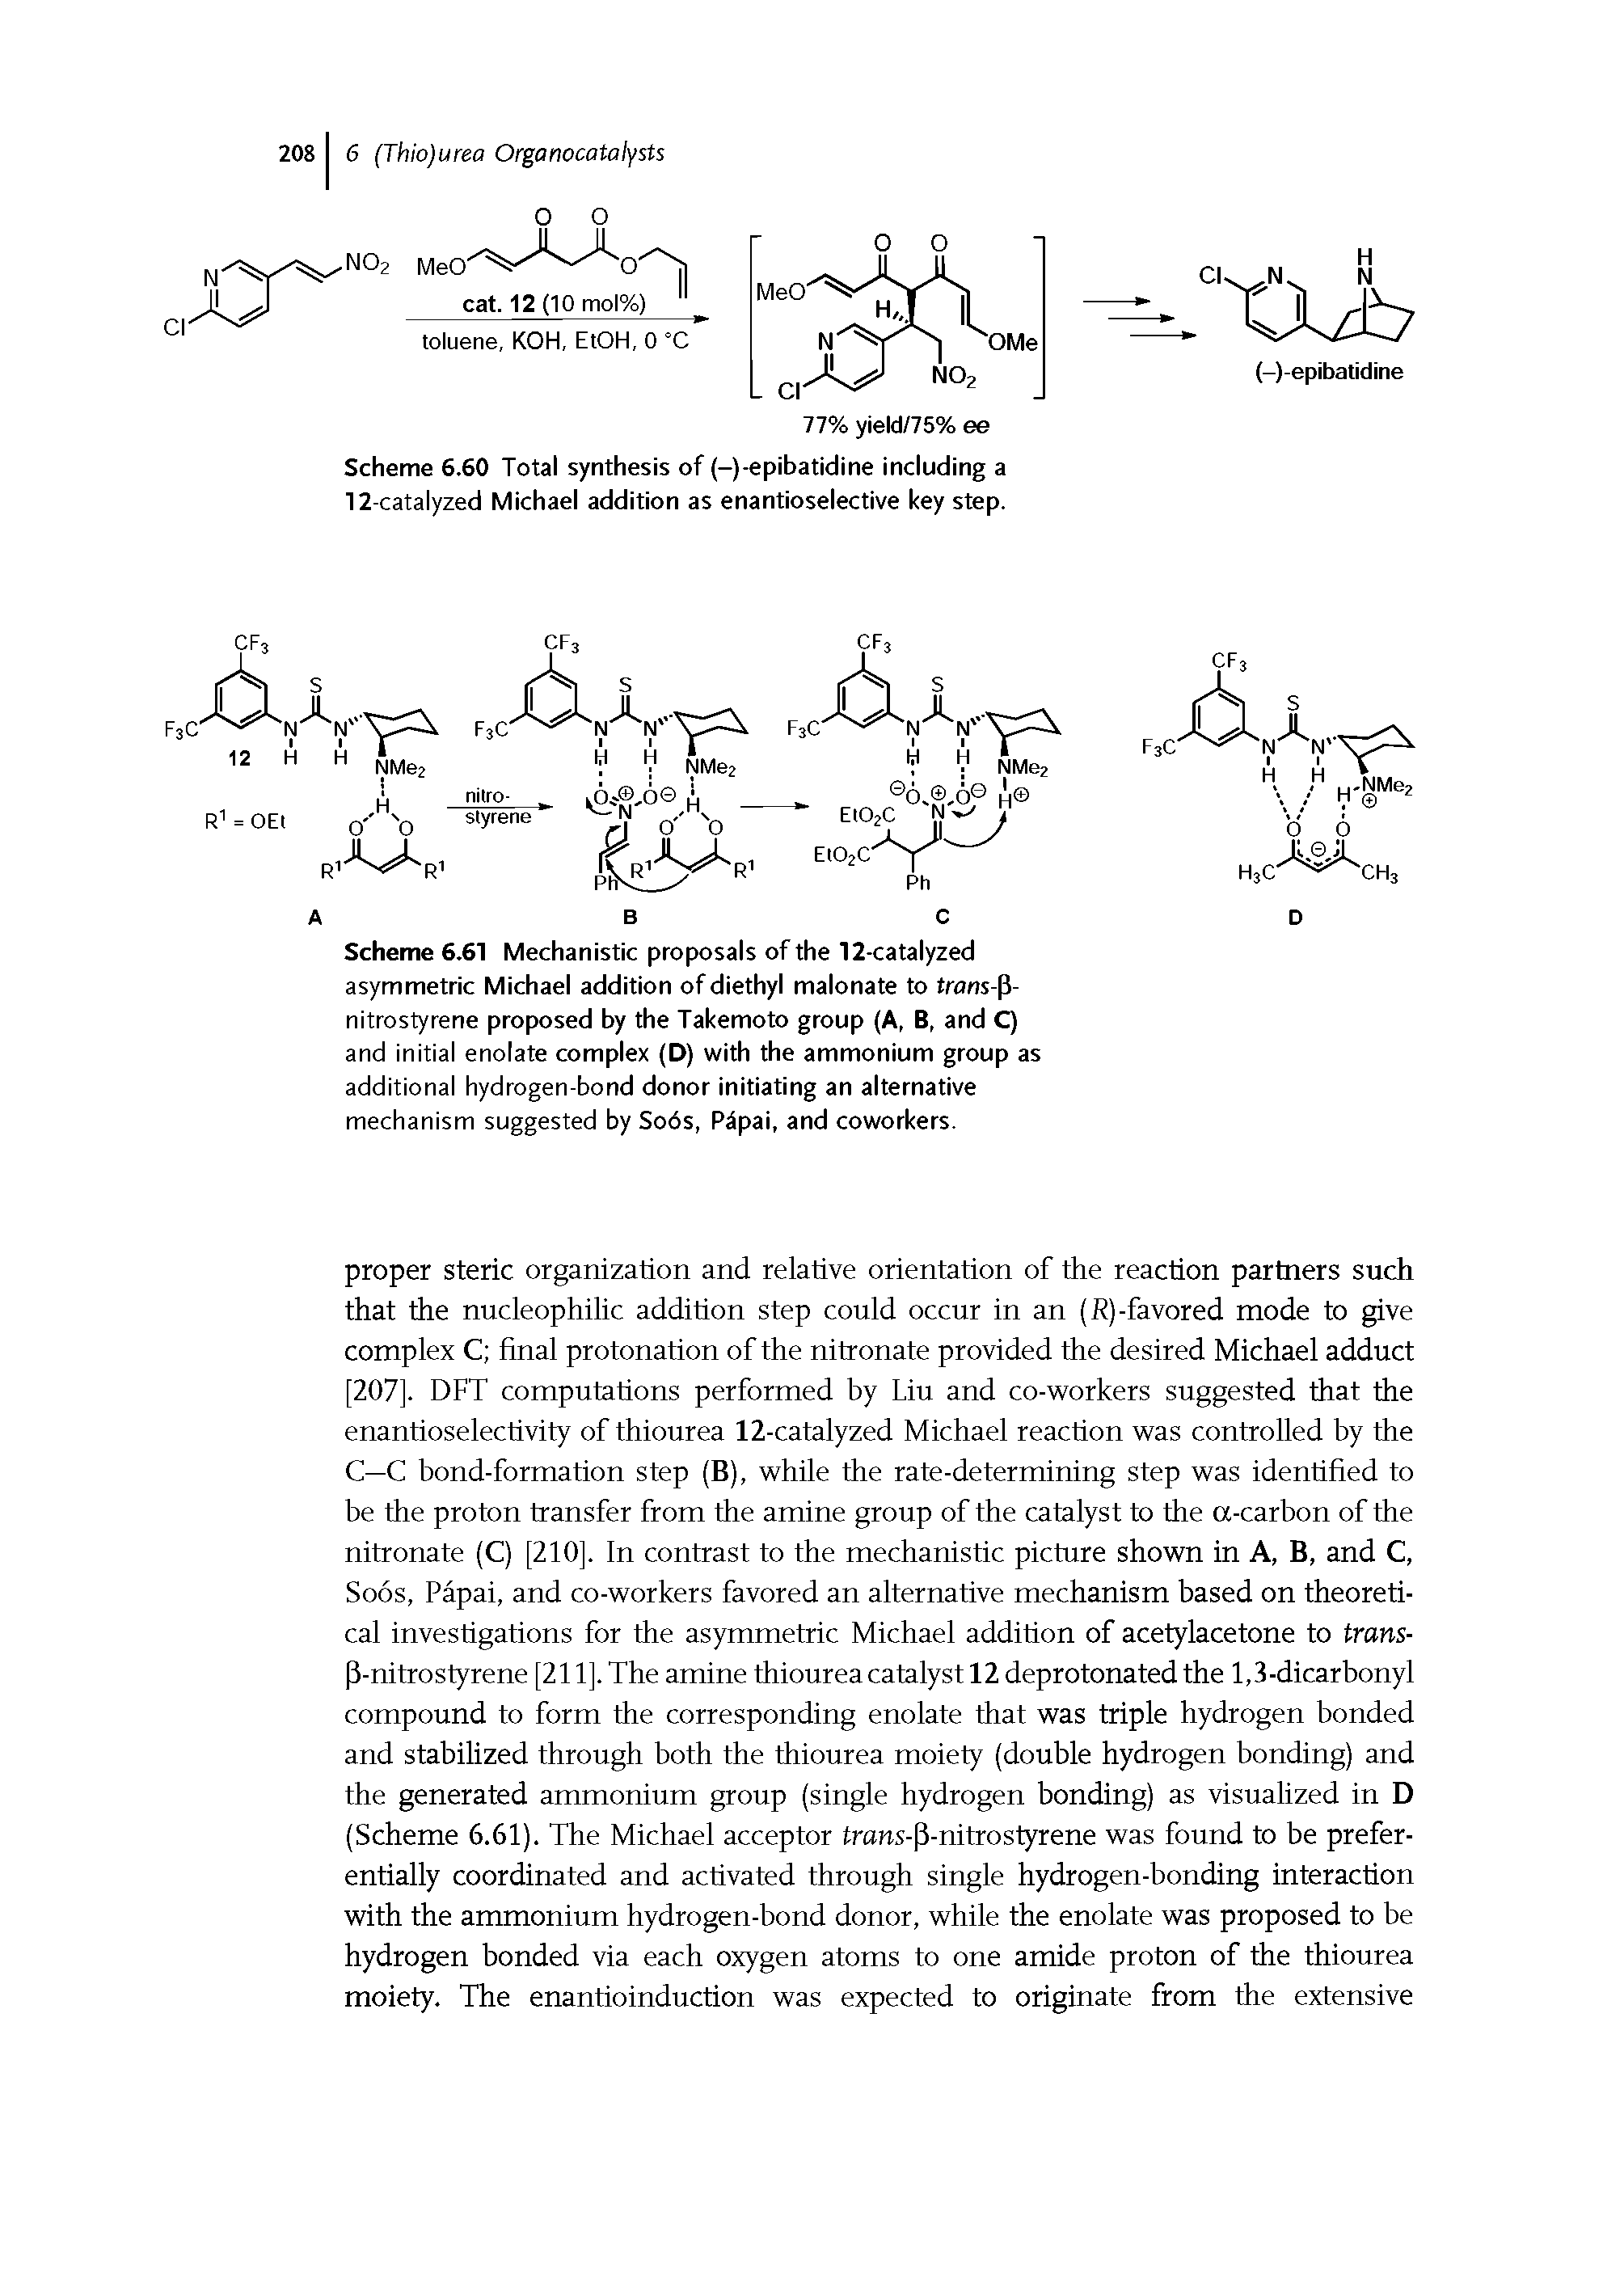 Scheme 6.61 Mechanistic proposals of the 12-catalyzed asymmetric Michael addition of diethyl malonate to trans-P-nitrostyrene proposed by the Takemoto group (A, B, and C) and initial enolate complex (D) with the ammonium group as additional hydrogen-bond donor initiating an alternative mechanism suggested by Sods, Ptipai, and coworkers.